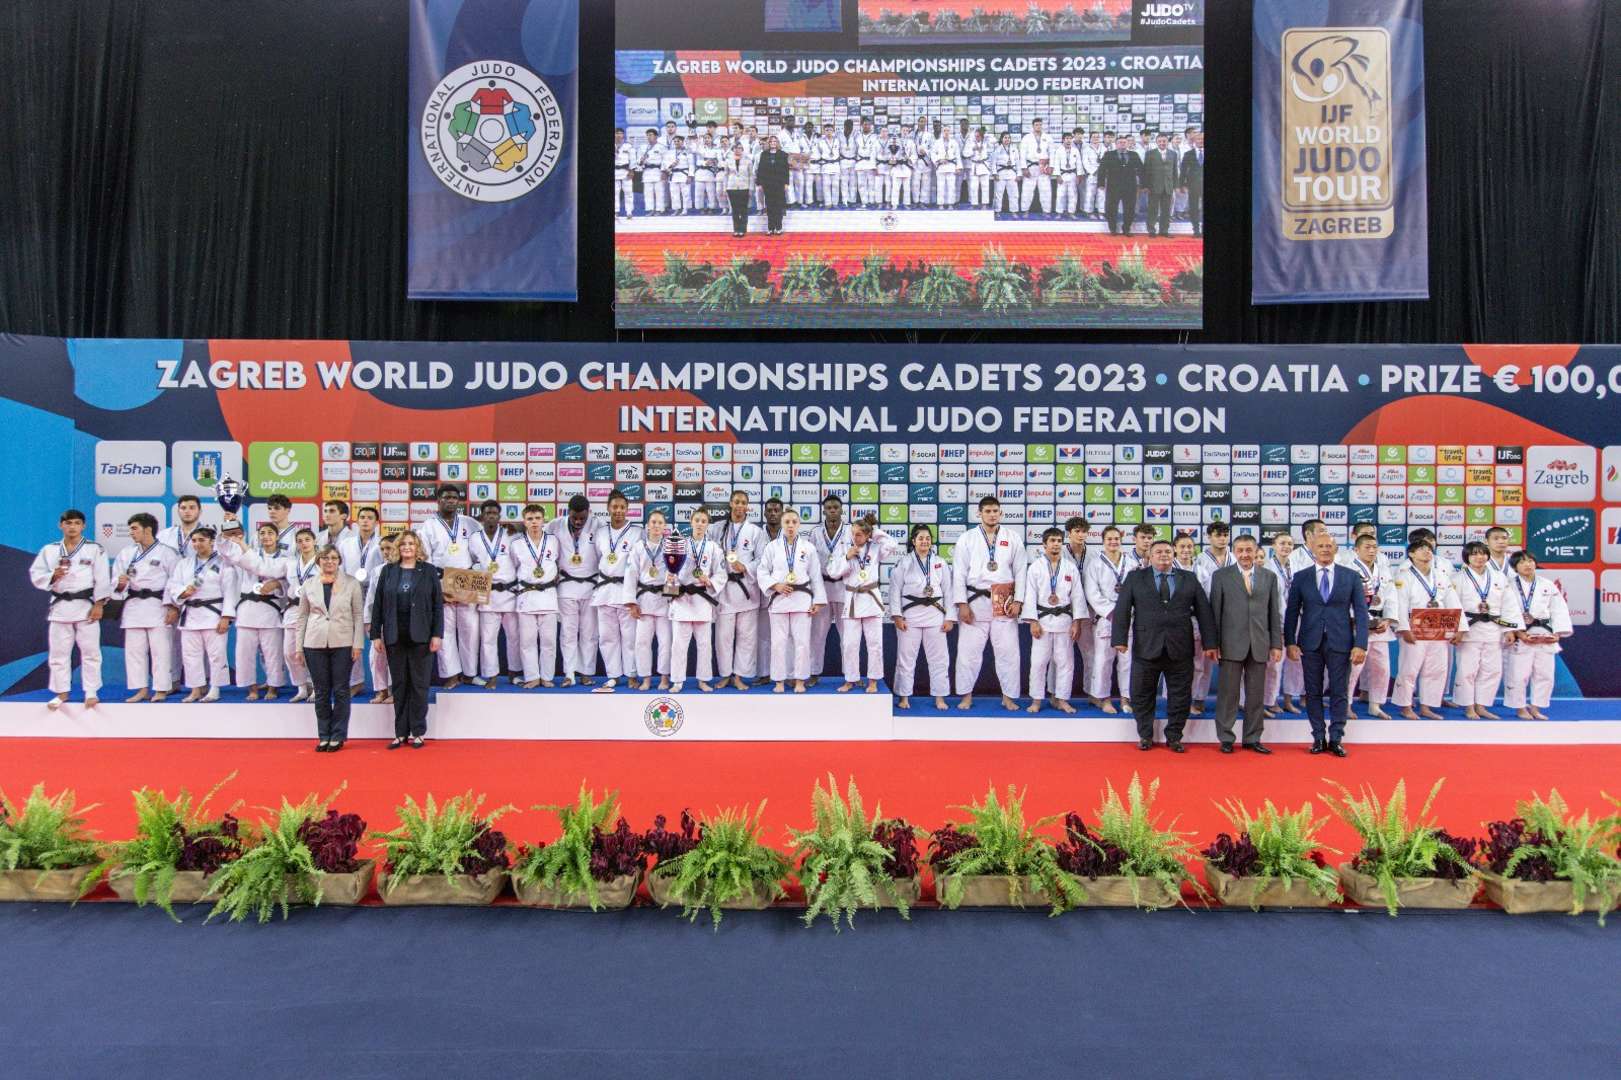 World Youth and Cadets Championship 2015 in Greece 02 – Asadi, Motahare (WFM)